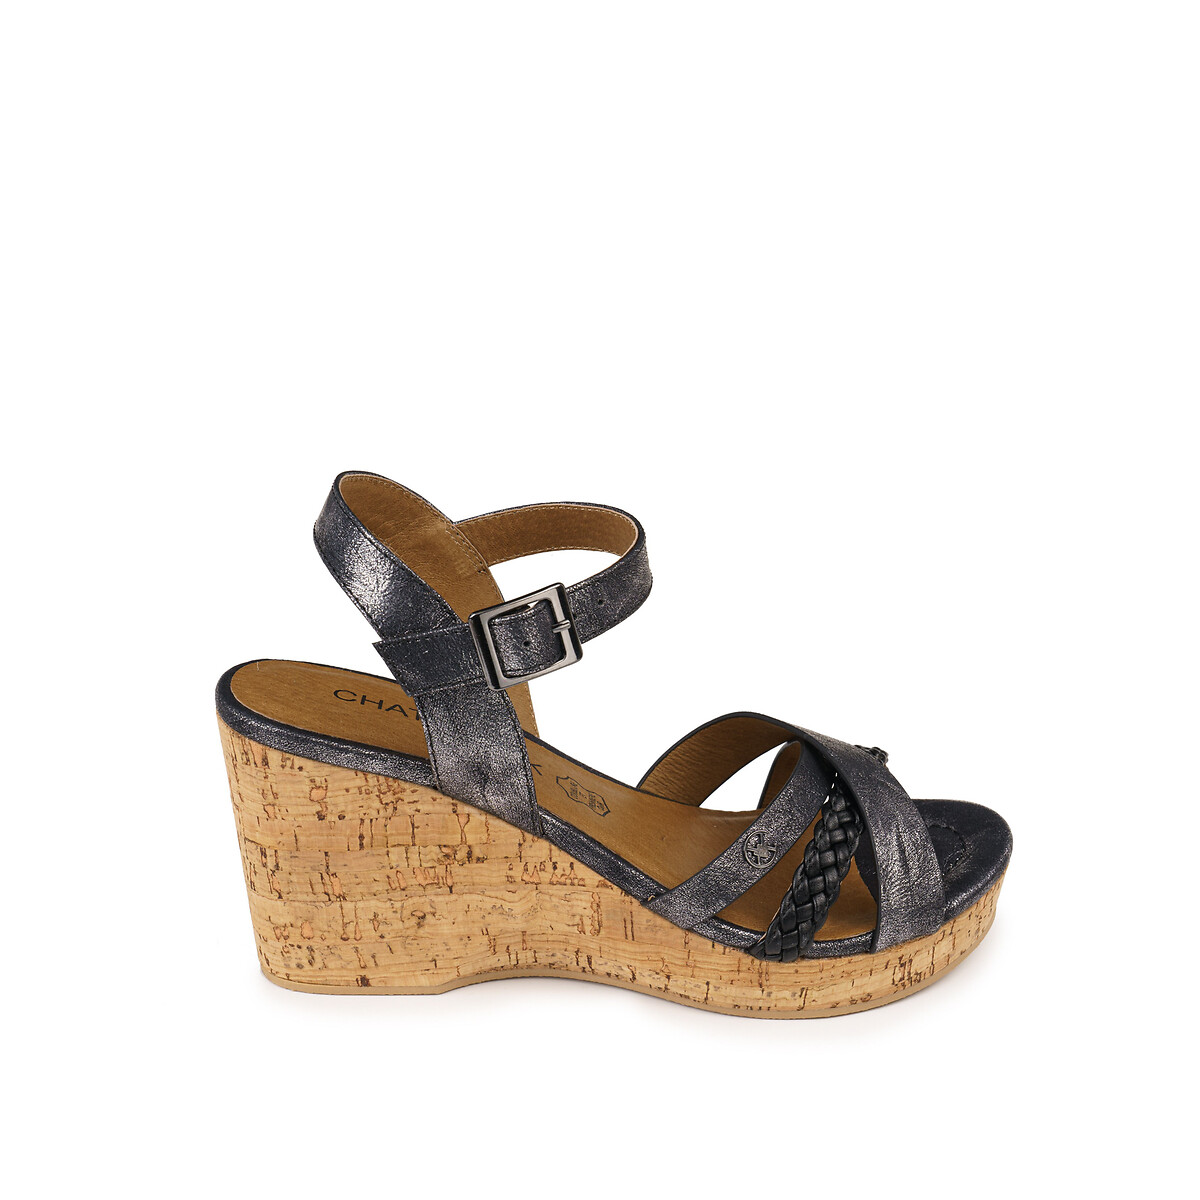 Tang Wedge Sandals with Cork Sole